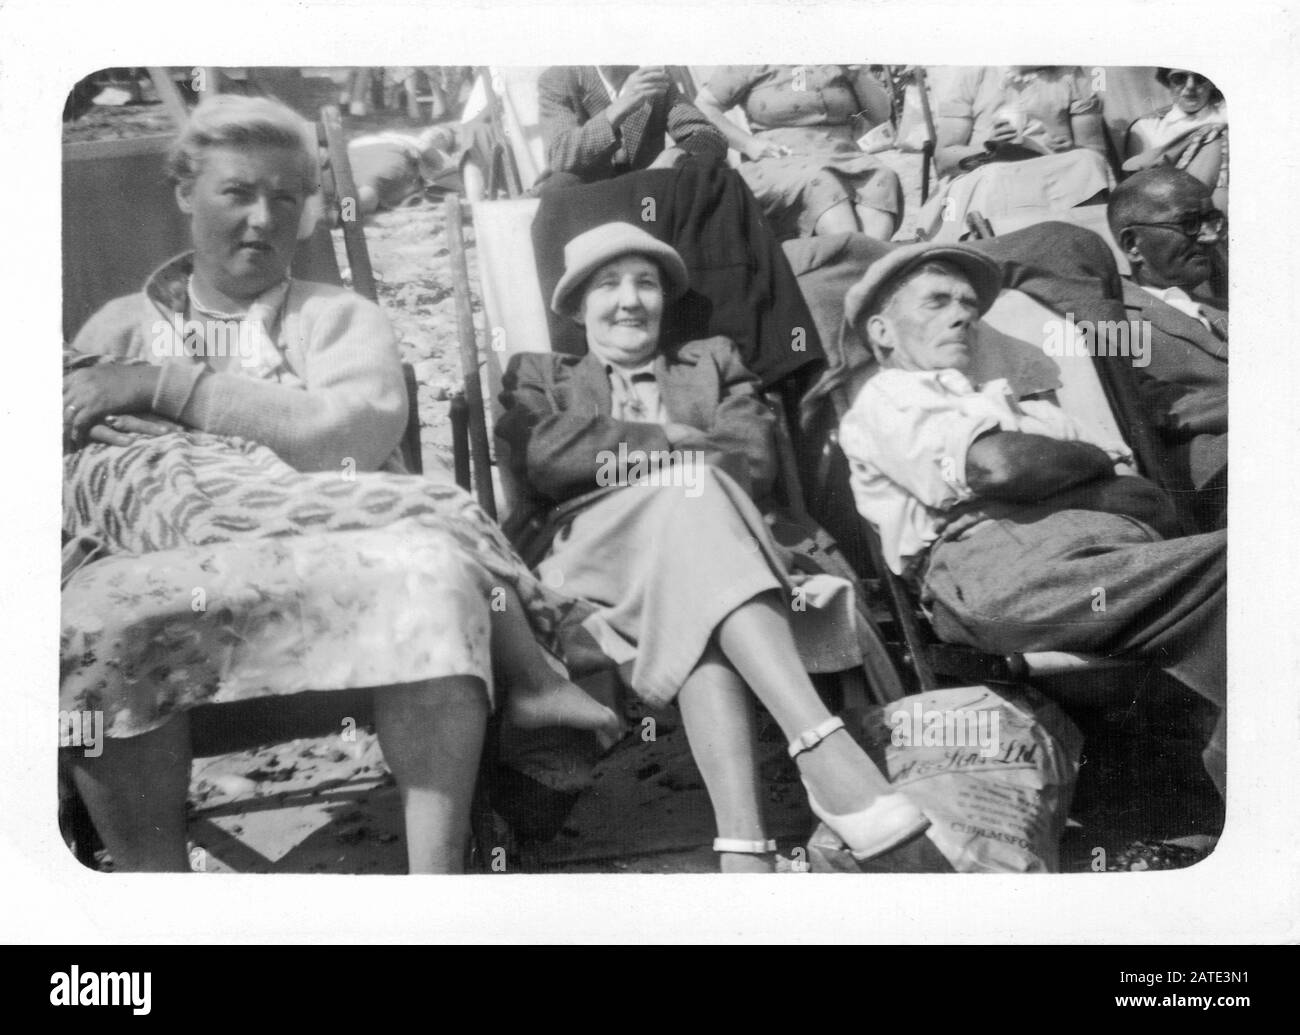 Family Holiday at the Seaside, Summer 1950s Britain Stock Photo